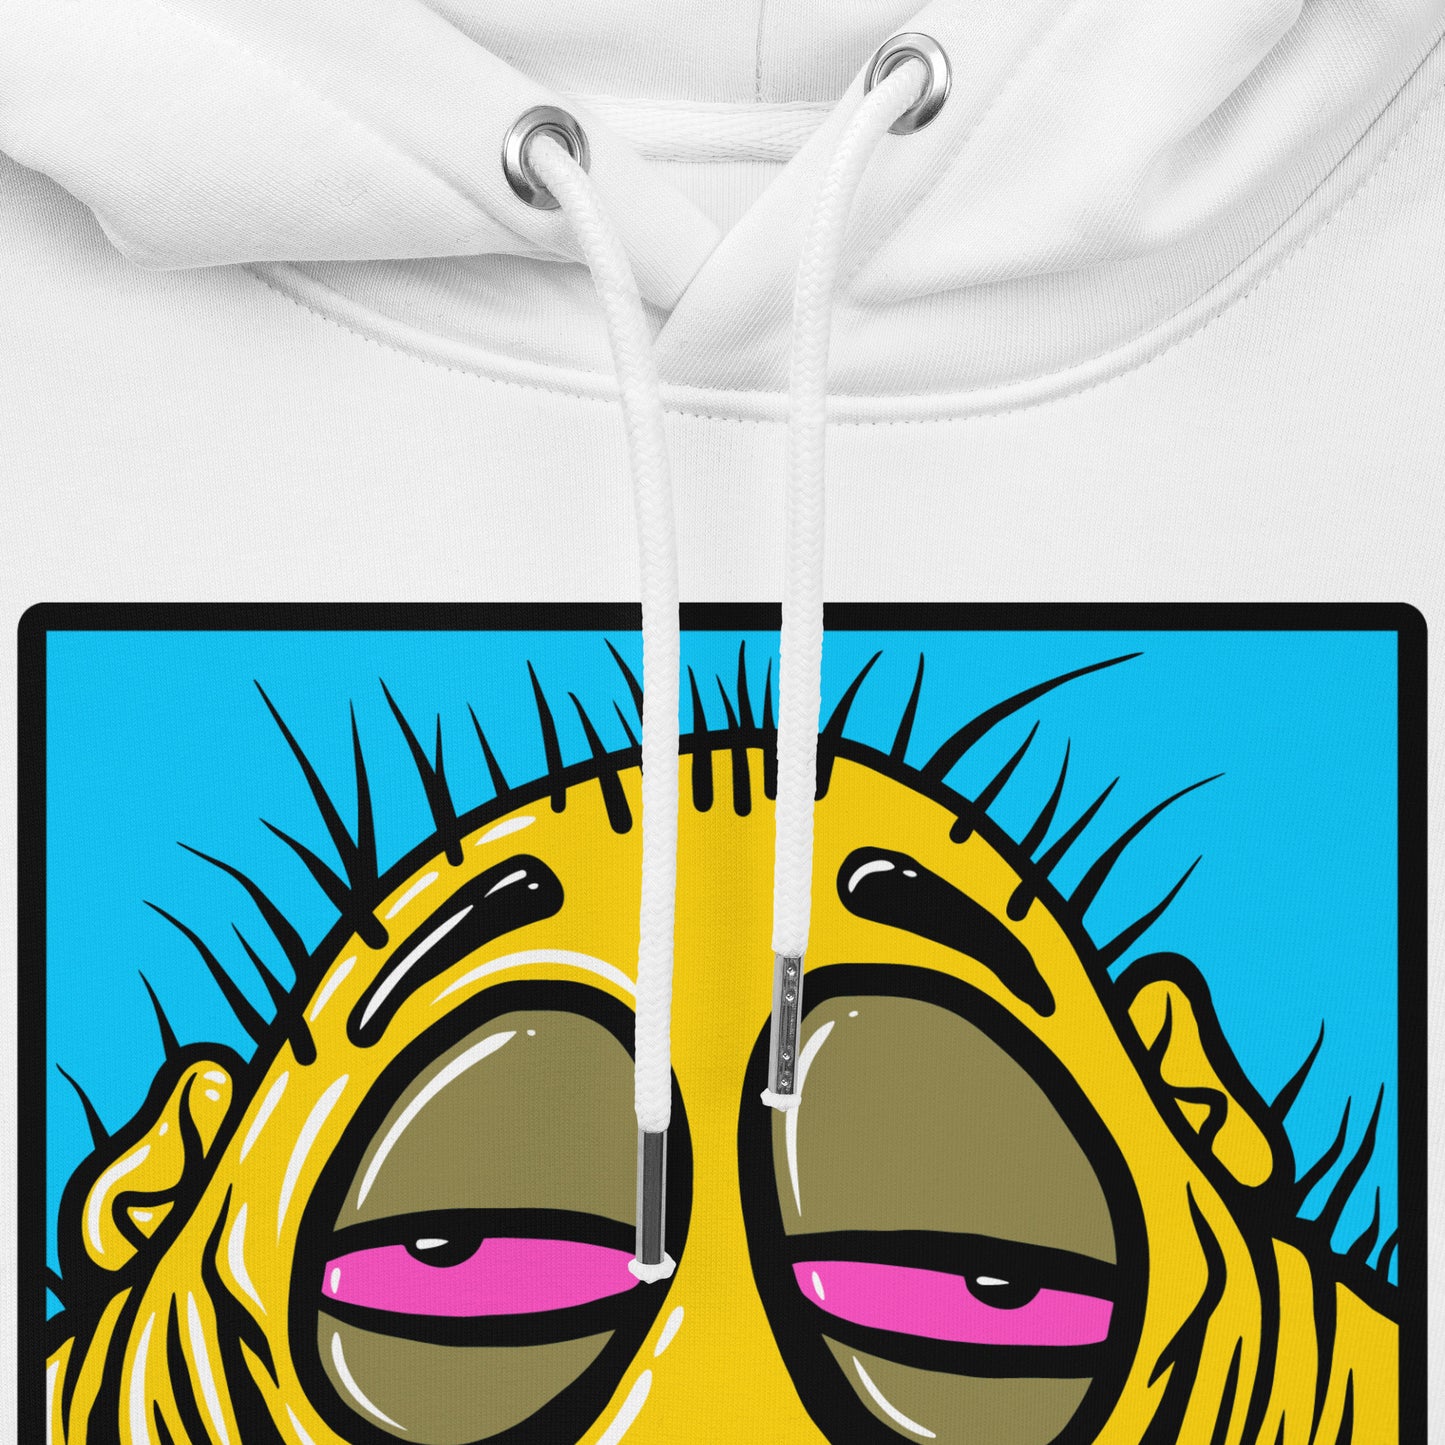 LICE ON A STONER HOODIE